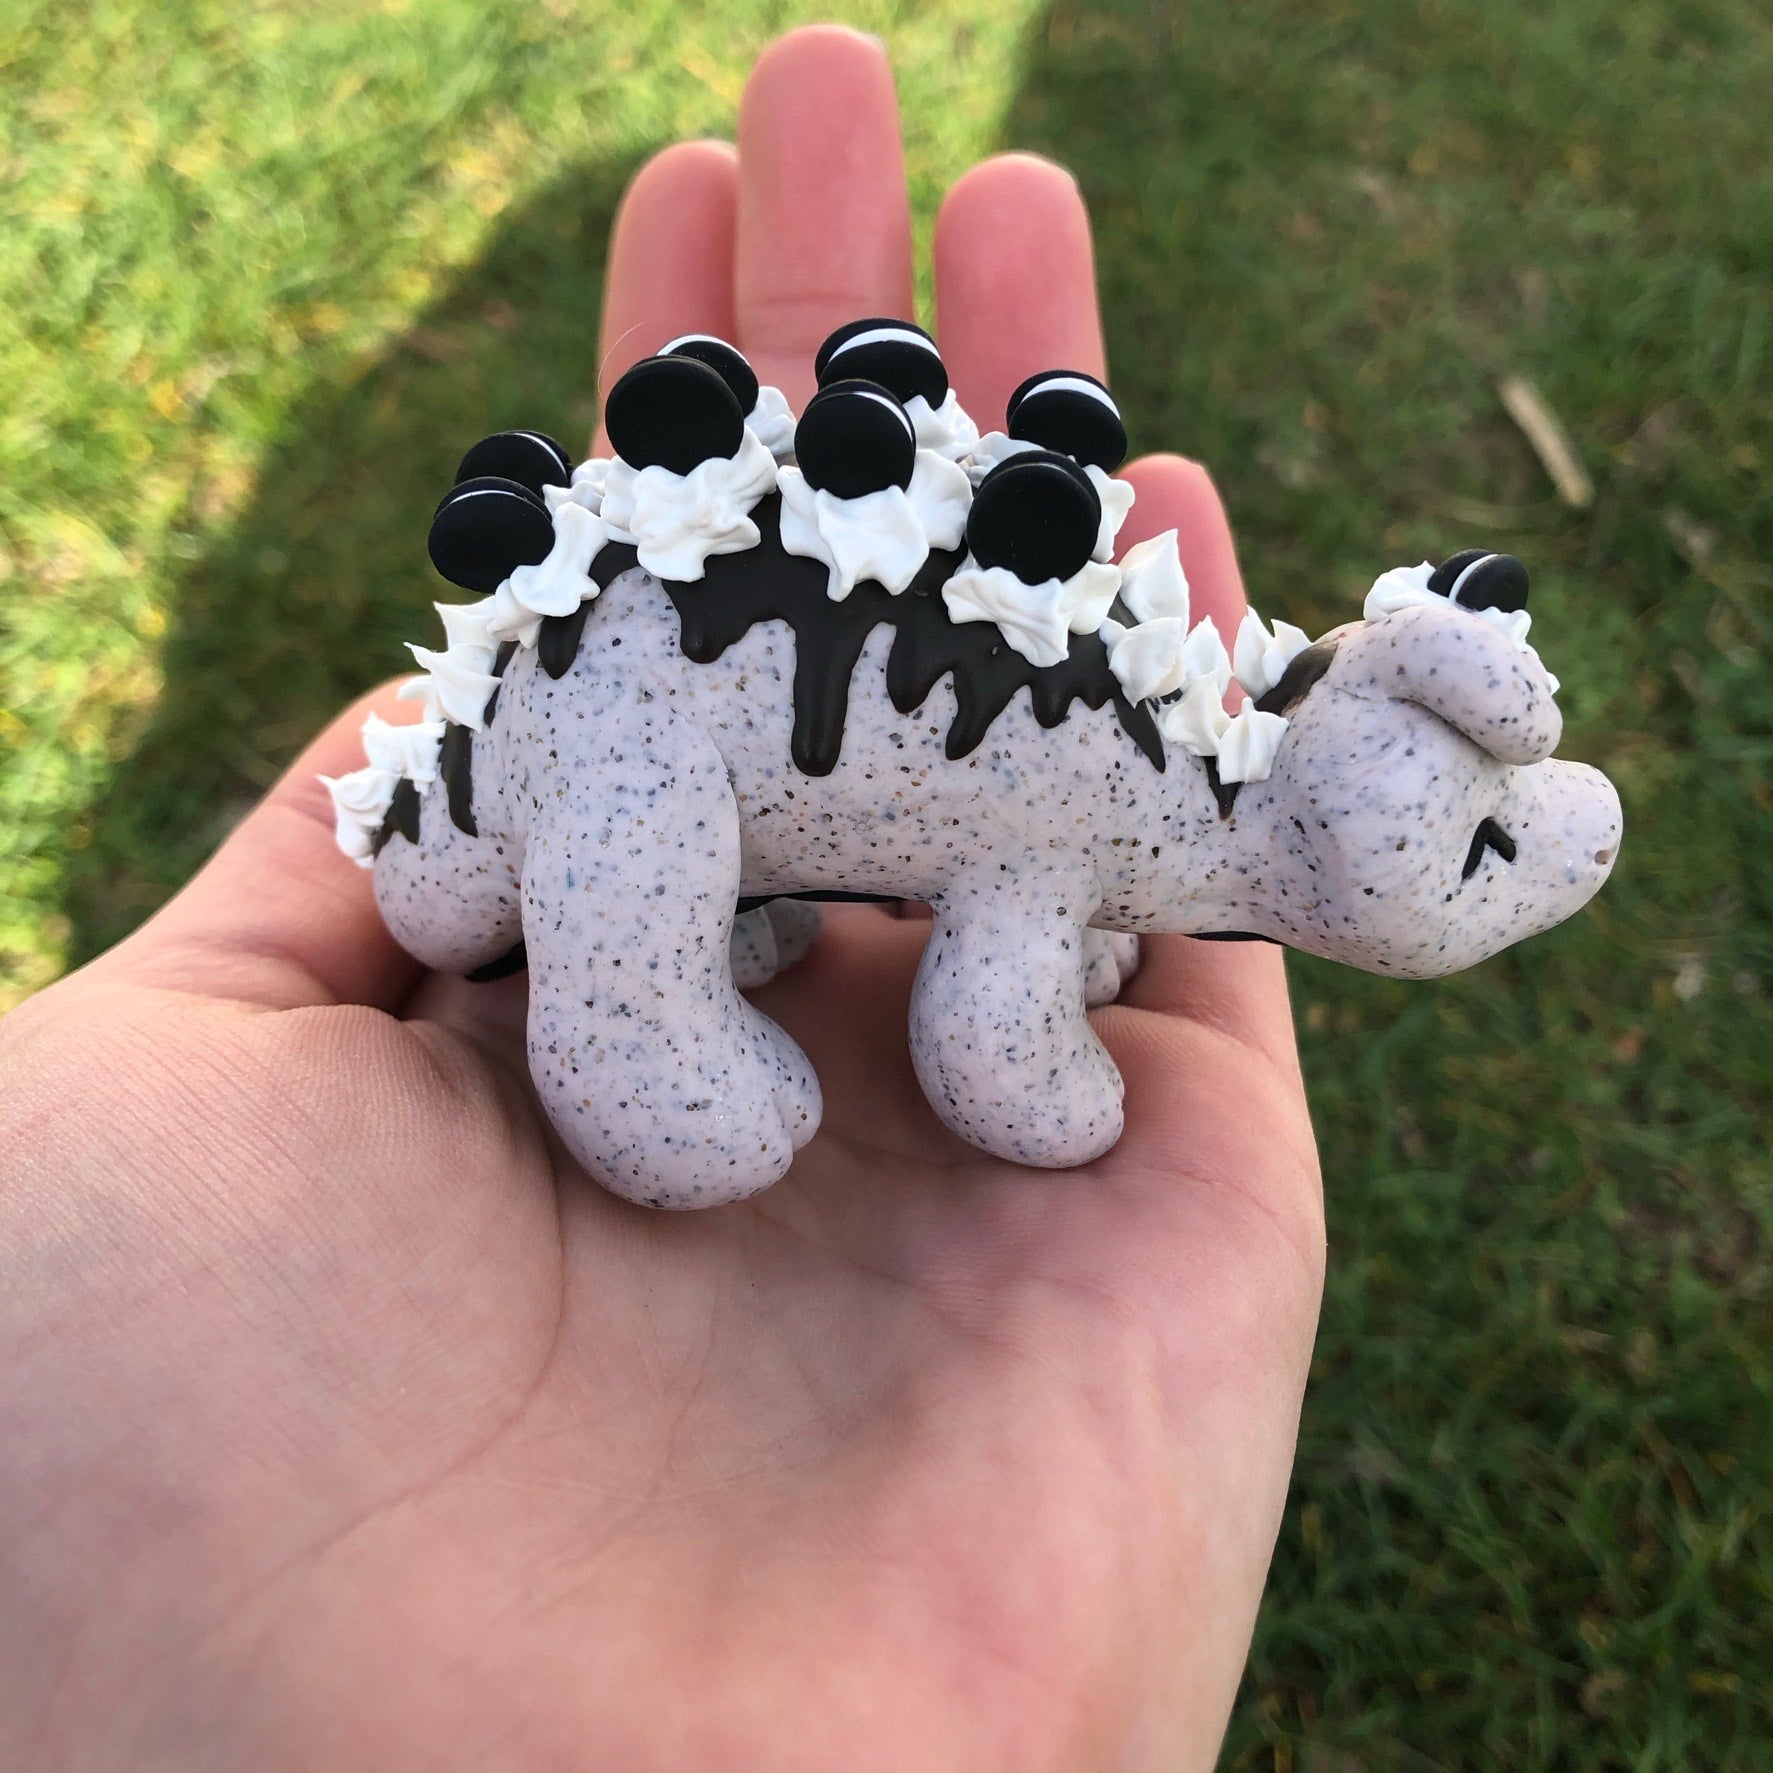 1. @kyliesmenagerie polymer clay cookies and cream themed dinosaur sitting on a hand